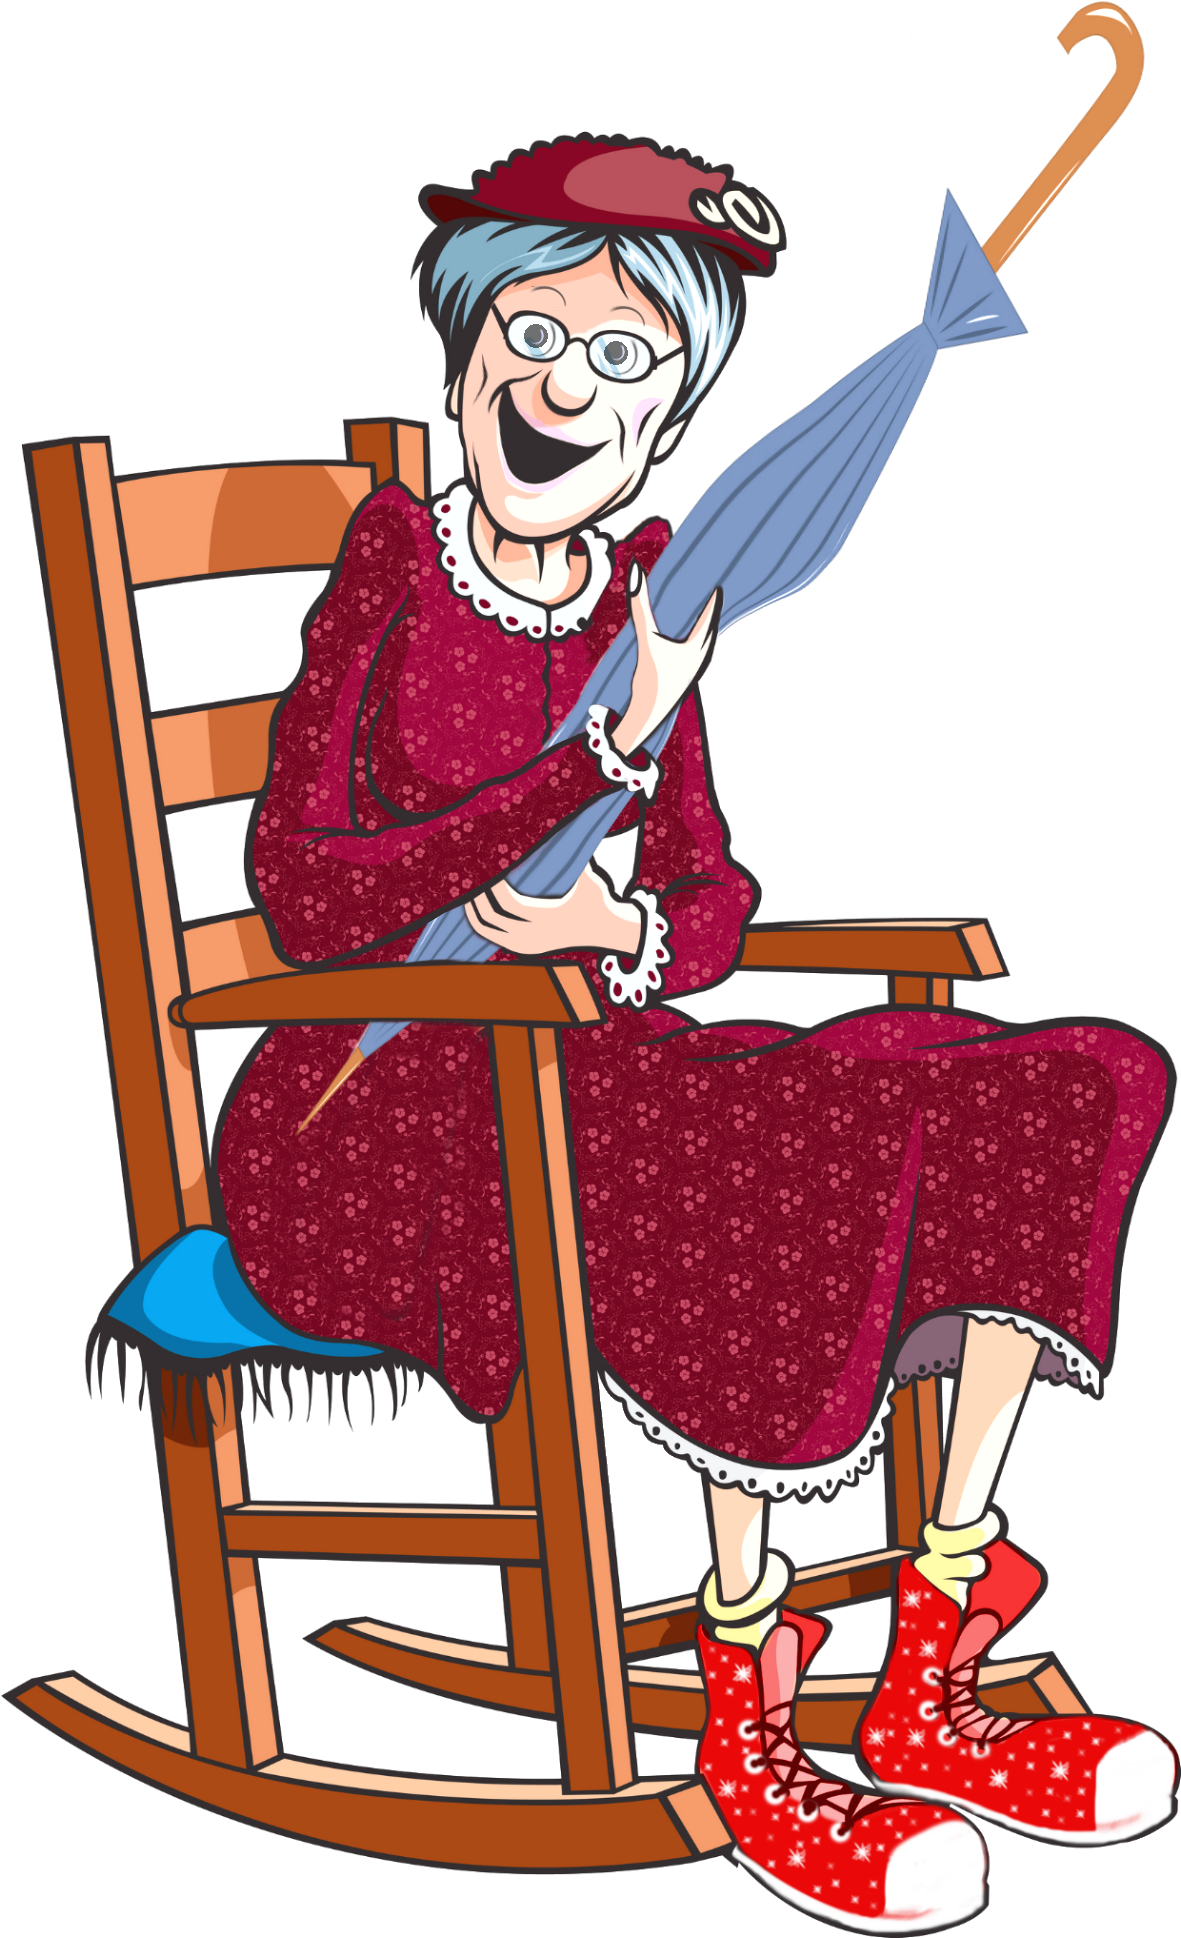 A Cartoon Of An Old Woman Sitting In A Rocking Chair